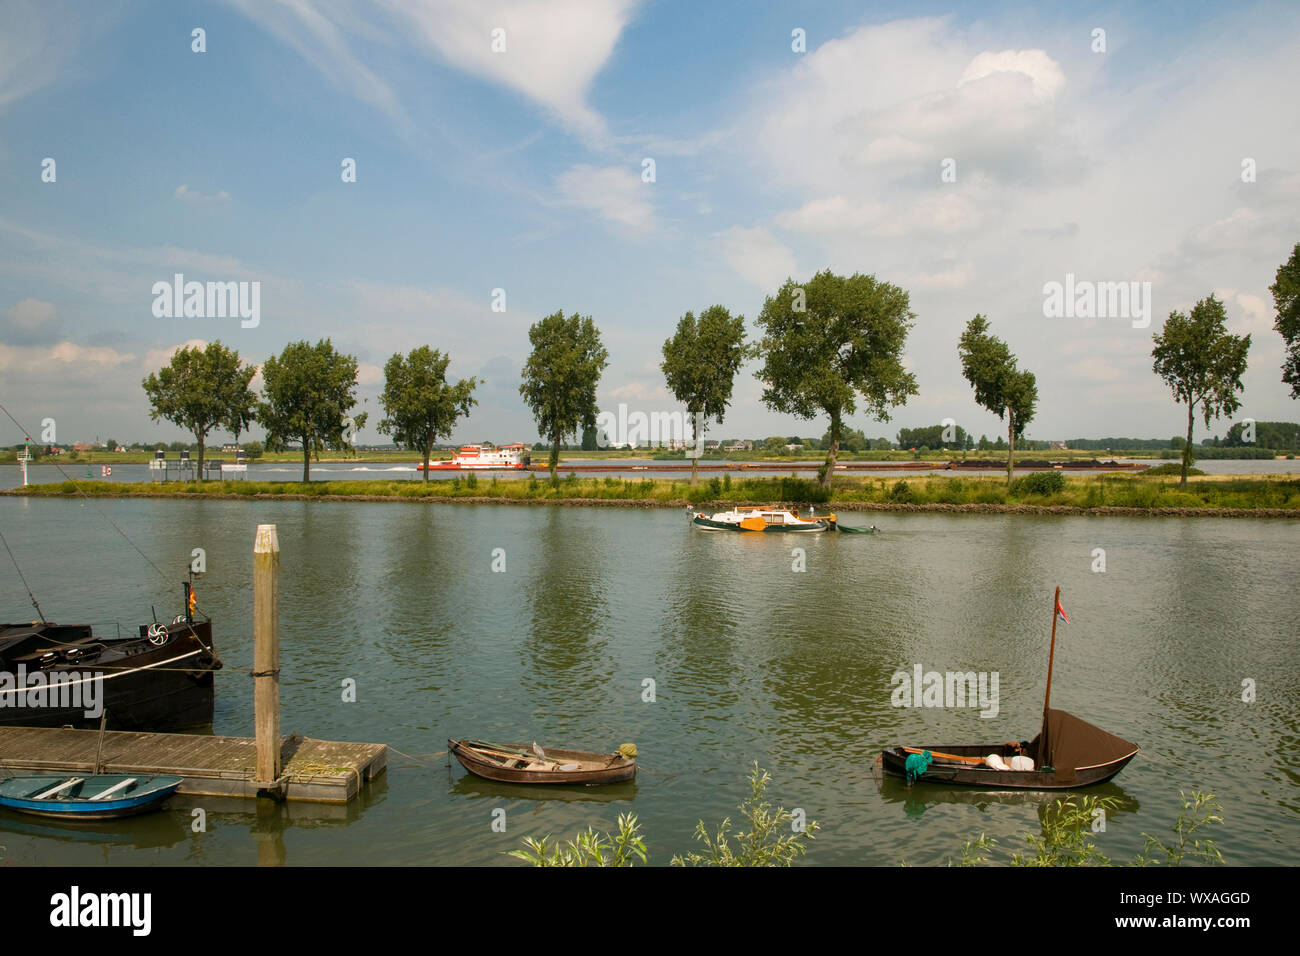 Riverlandscape in Holland with boats Stock Photo